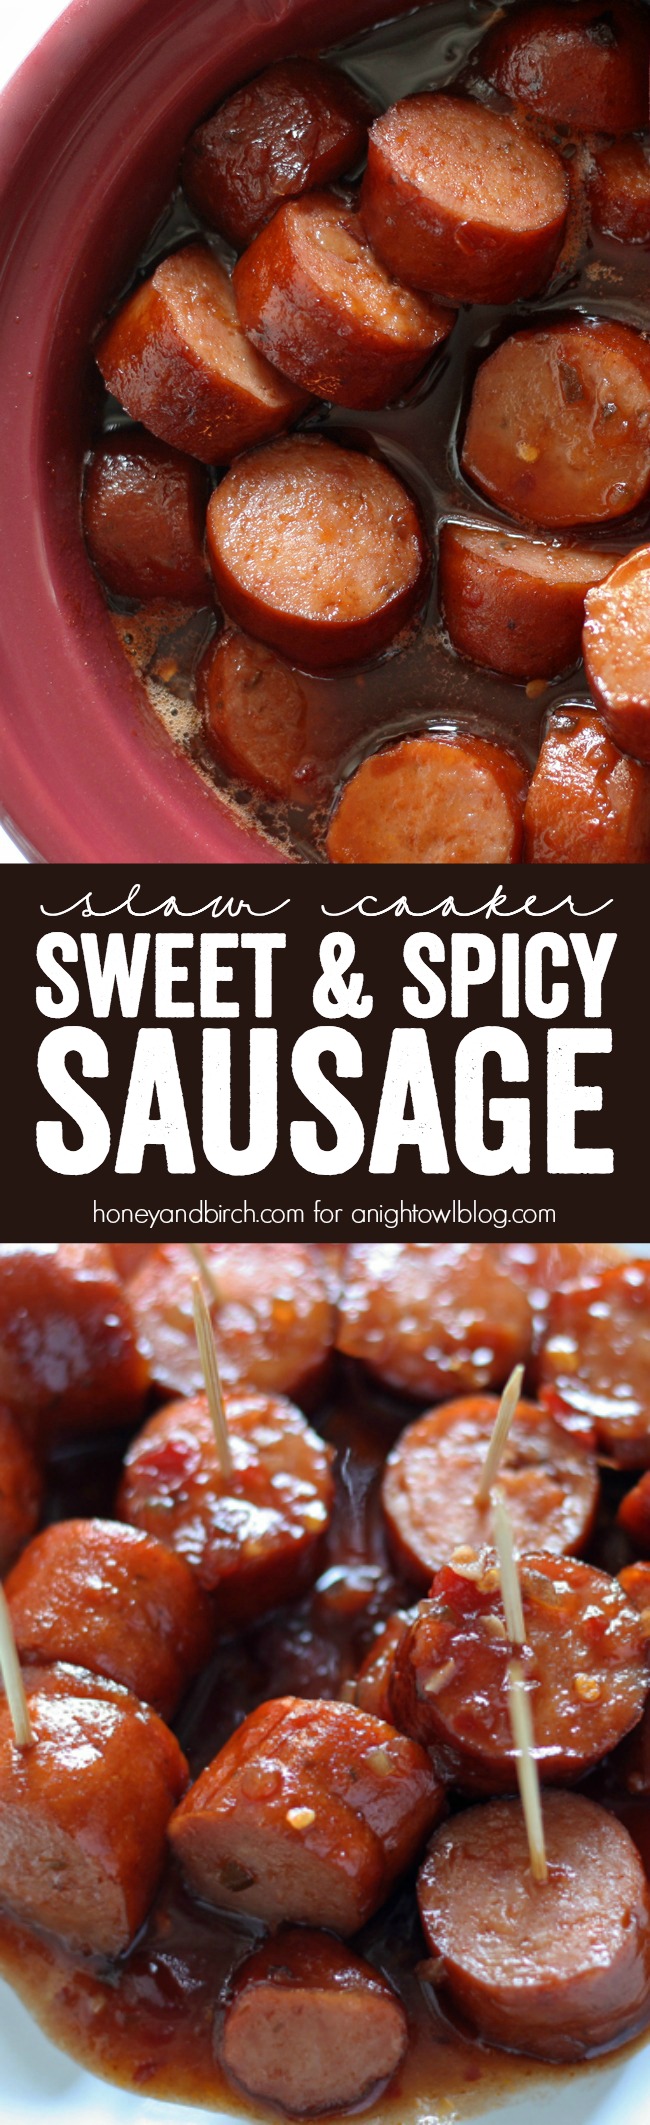 Our Slow Cooker Sweet Spicy Sausage is the perfect blend of sweet, spicy and smoky and is sure to be your new favorite appetizer!